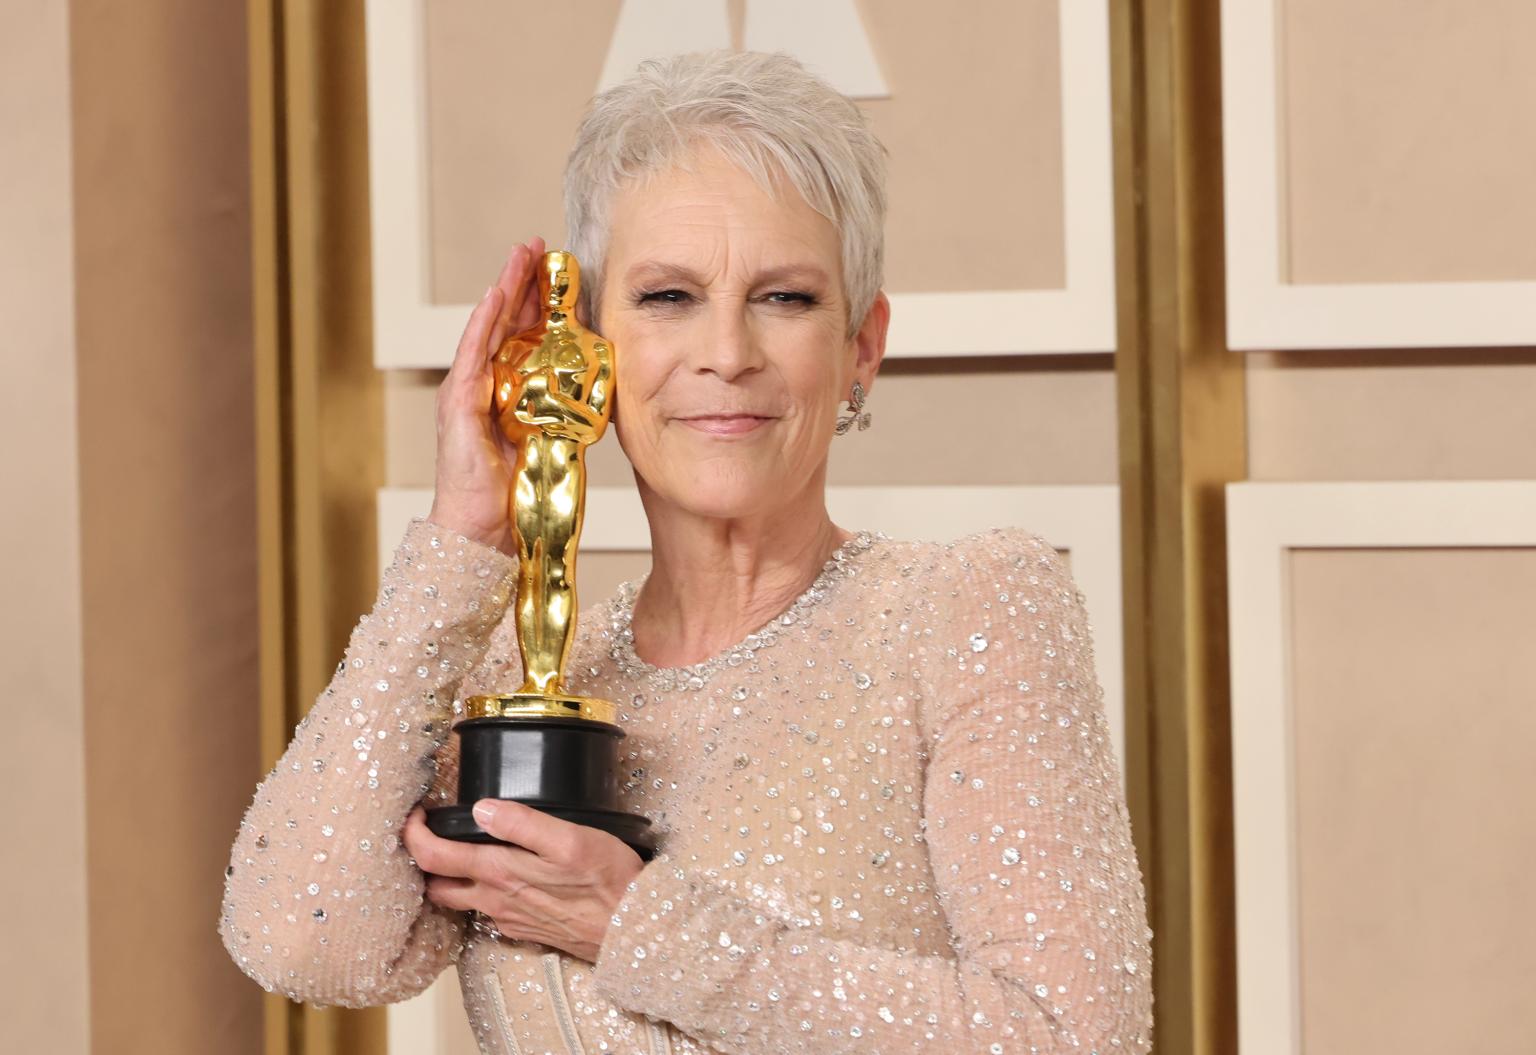 Actress Jamie Lee Curtis celebrates 25 years of being ?clean and sober? after struggling with opioid abuse